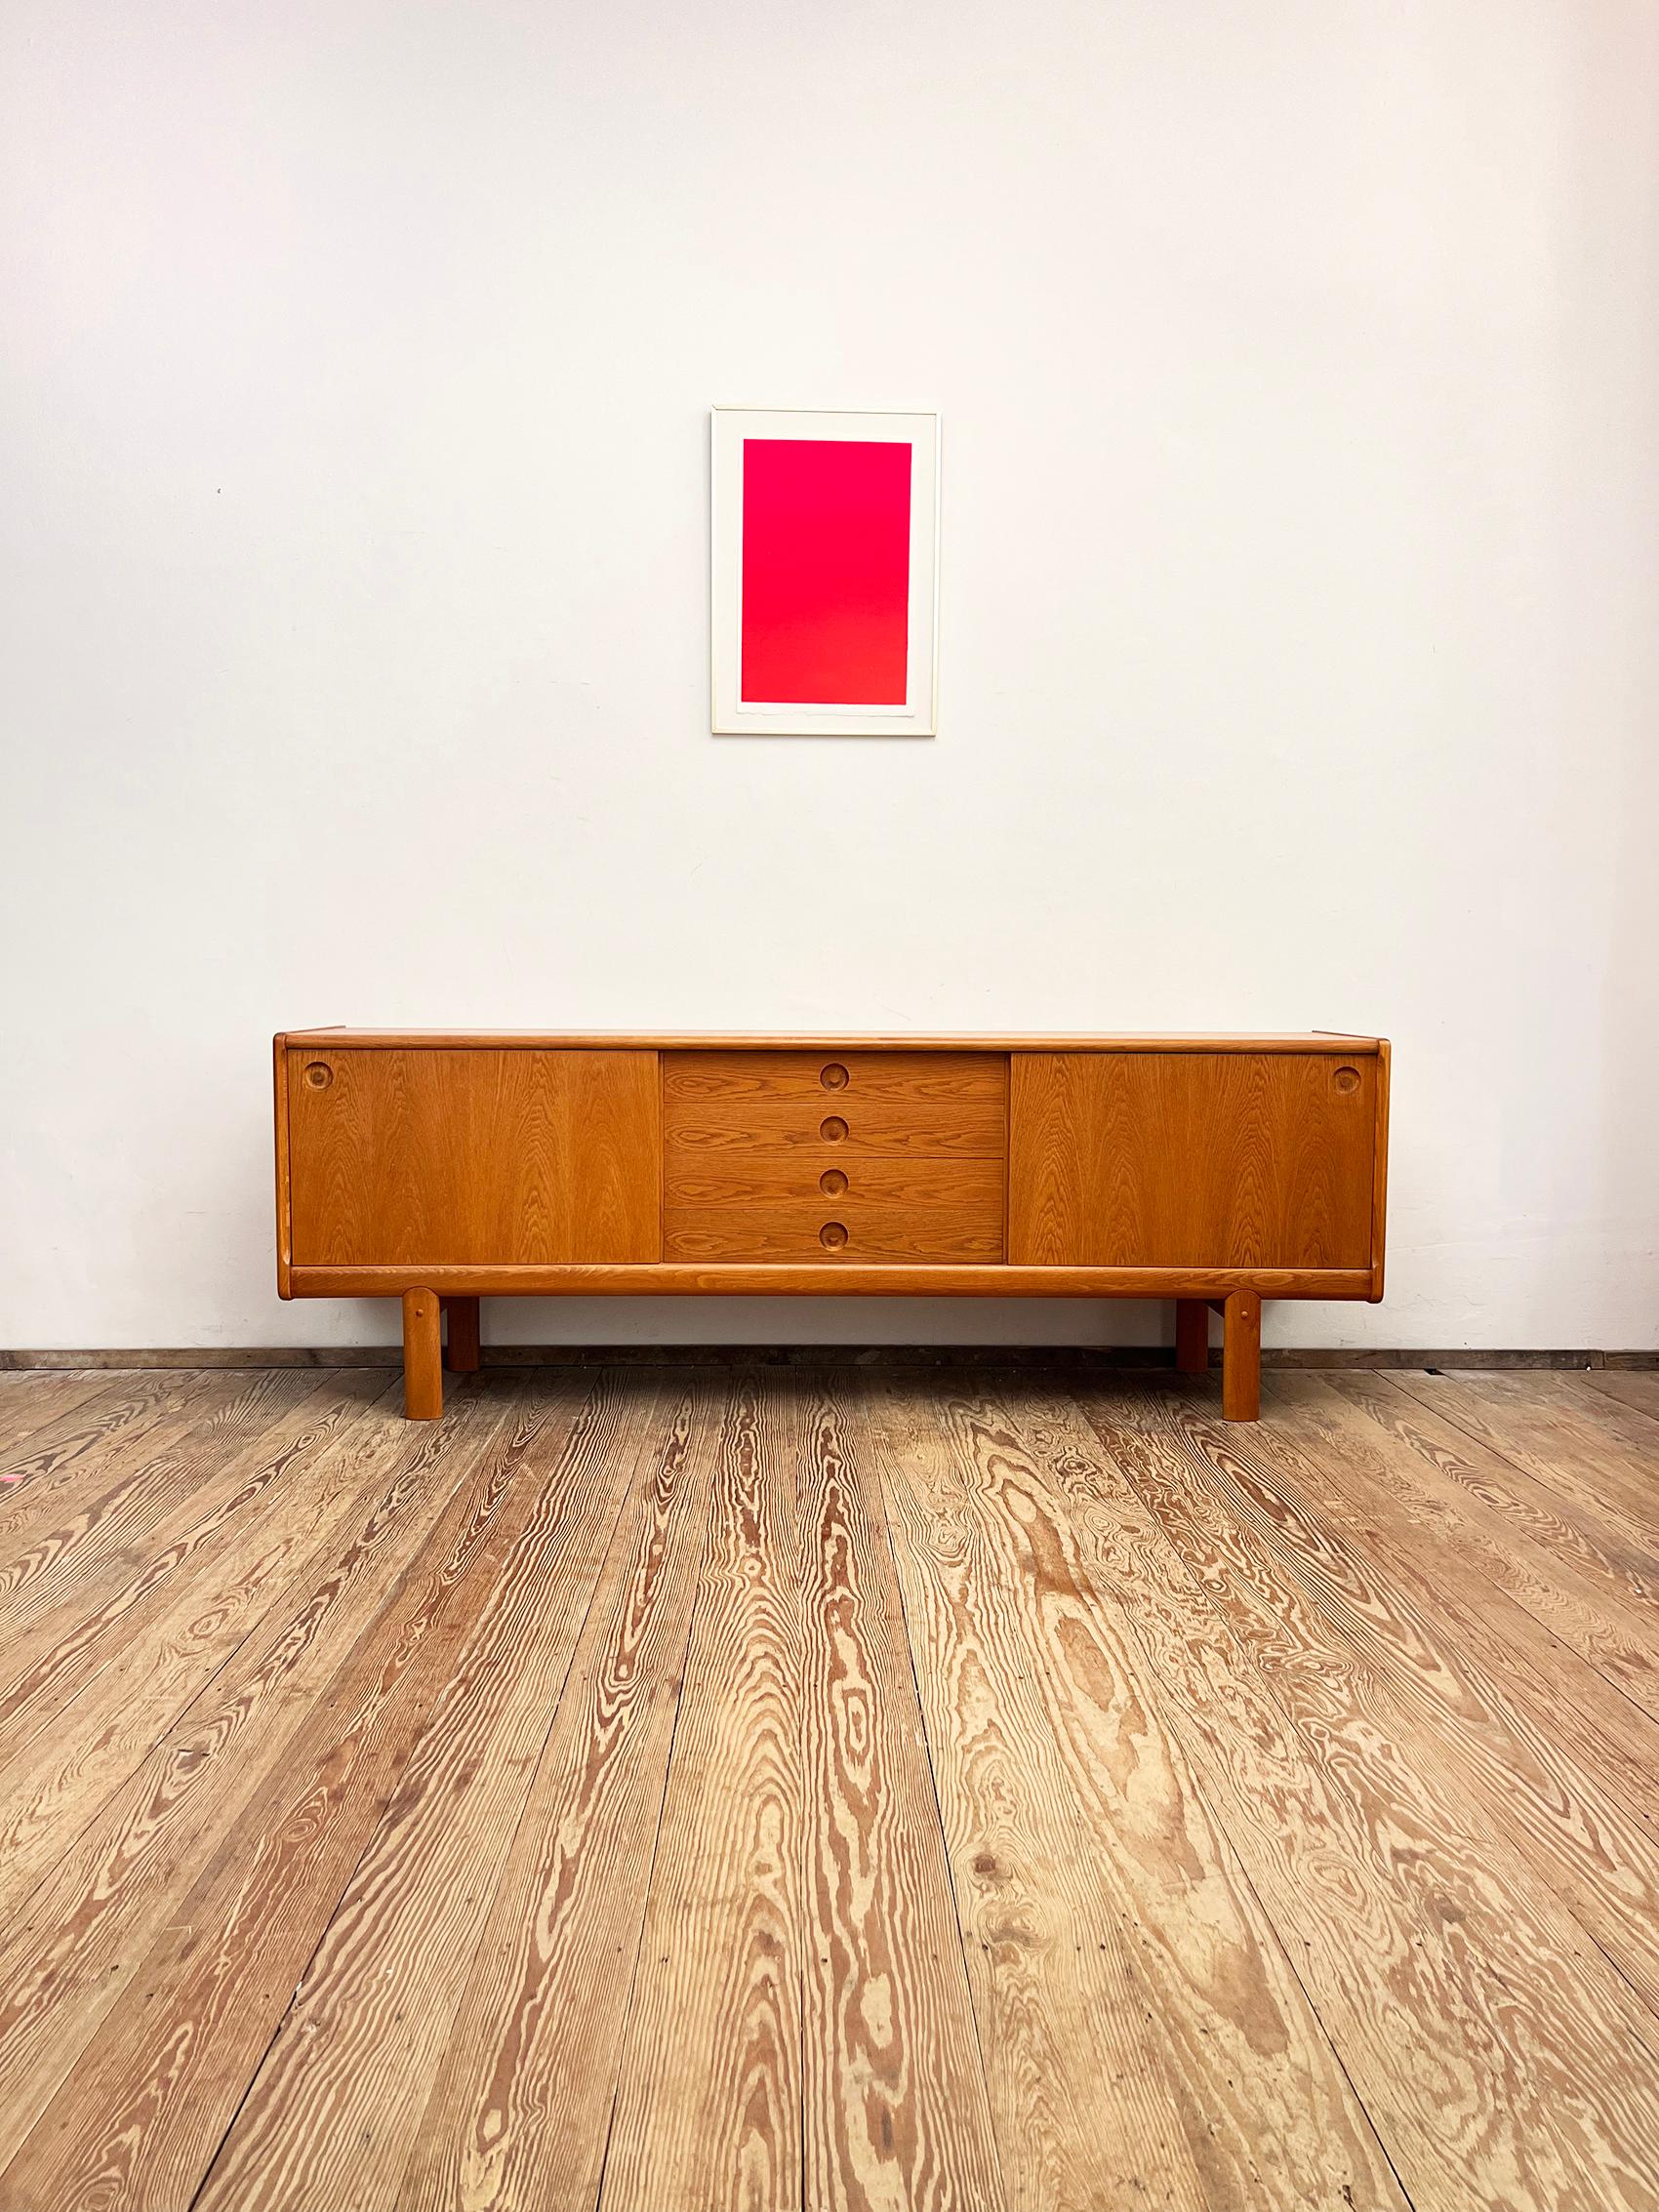 Dimensions: 223 x 45 x 80 cm ( (Width x Depth x Height)

This mid century modern credenza was designed in the 1960s by H.W. Klein and manufactured by Bramin in Denmark.

The Scandinavian design shows exquisite Danish craftsmanship and offers plenty